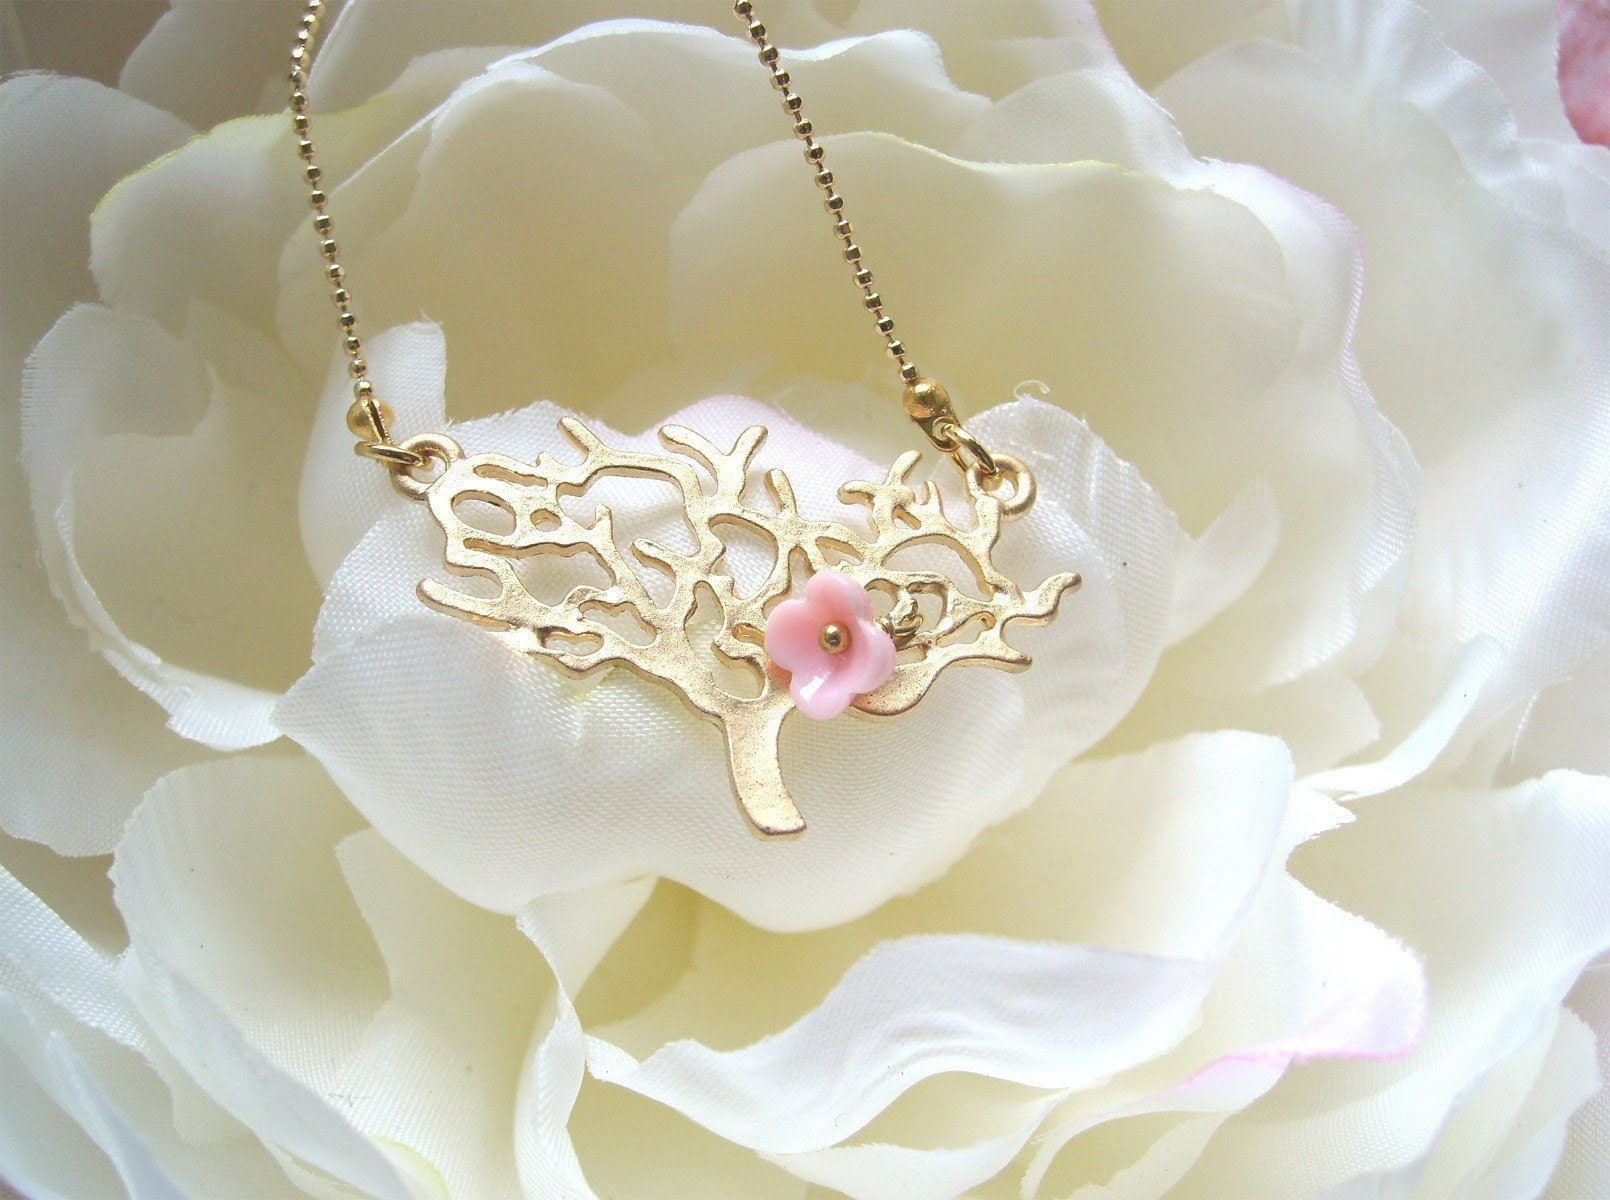 Last Flower. pink flower on the tree. Magical and Whimsical brass necklace. Dainty and feminine.